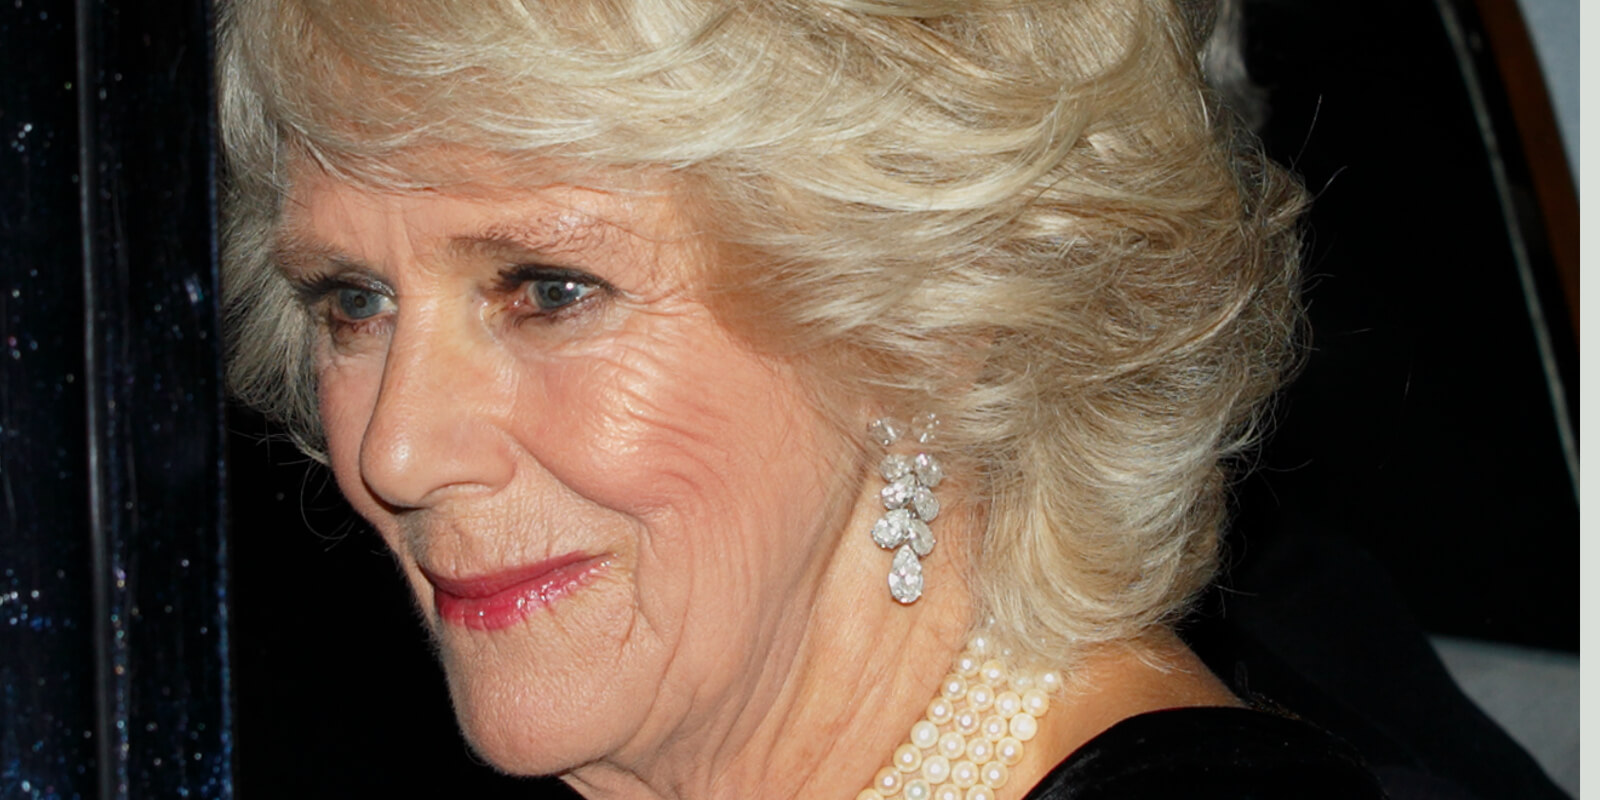 Camilla Parker Bowles is now known as Queen Camilla according to her coronation invitation.